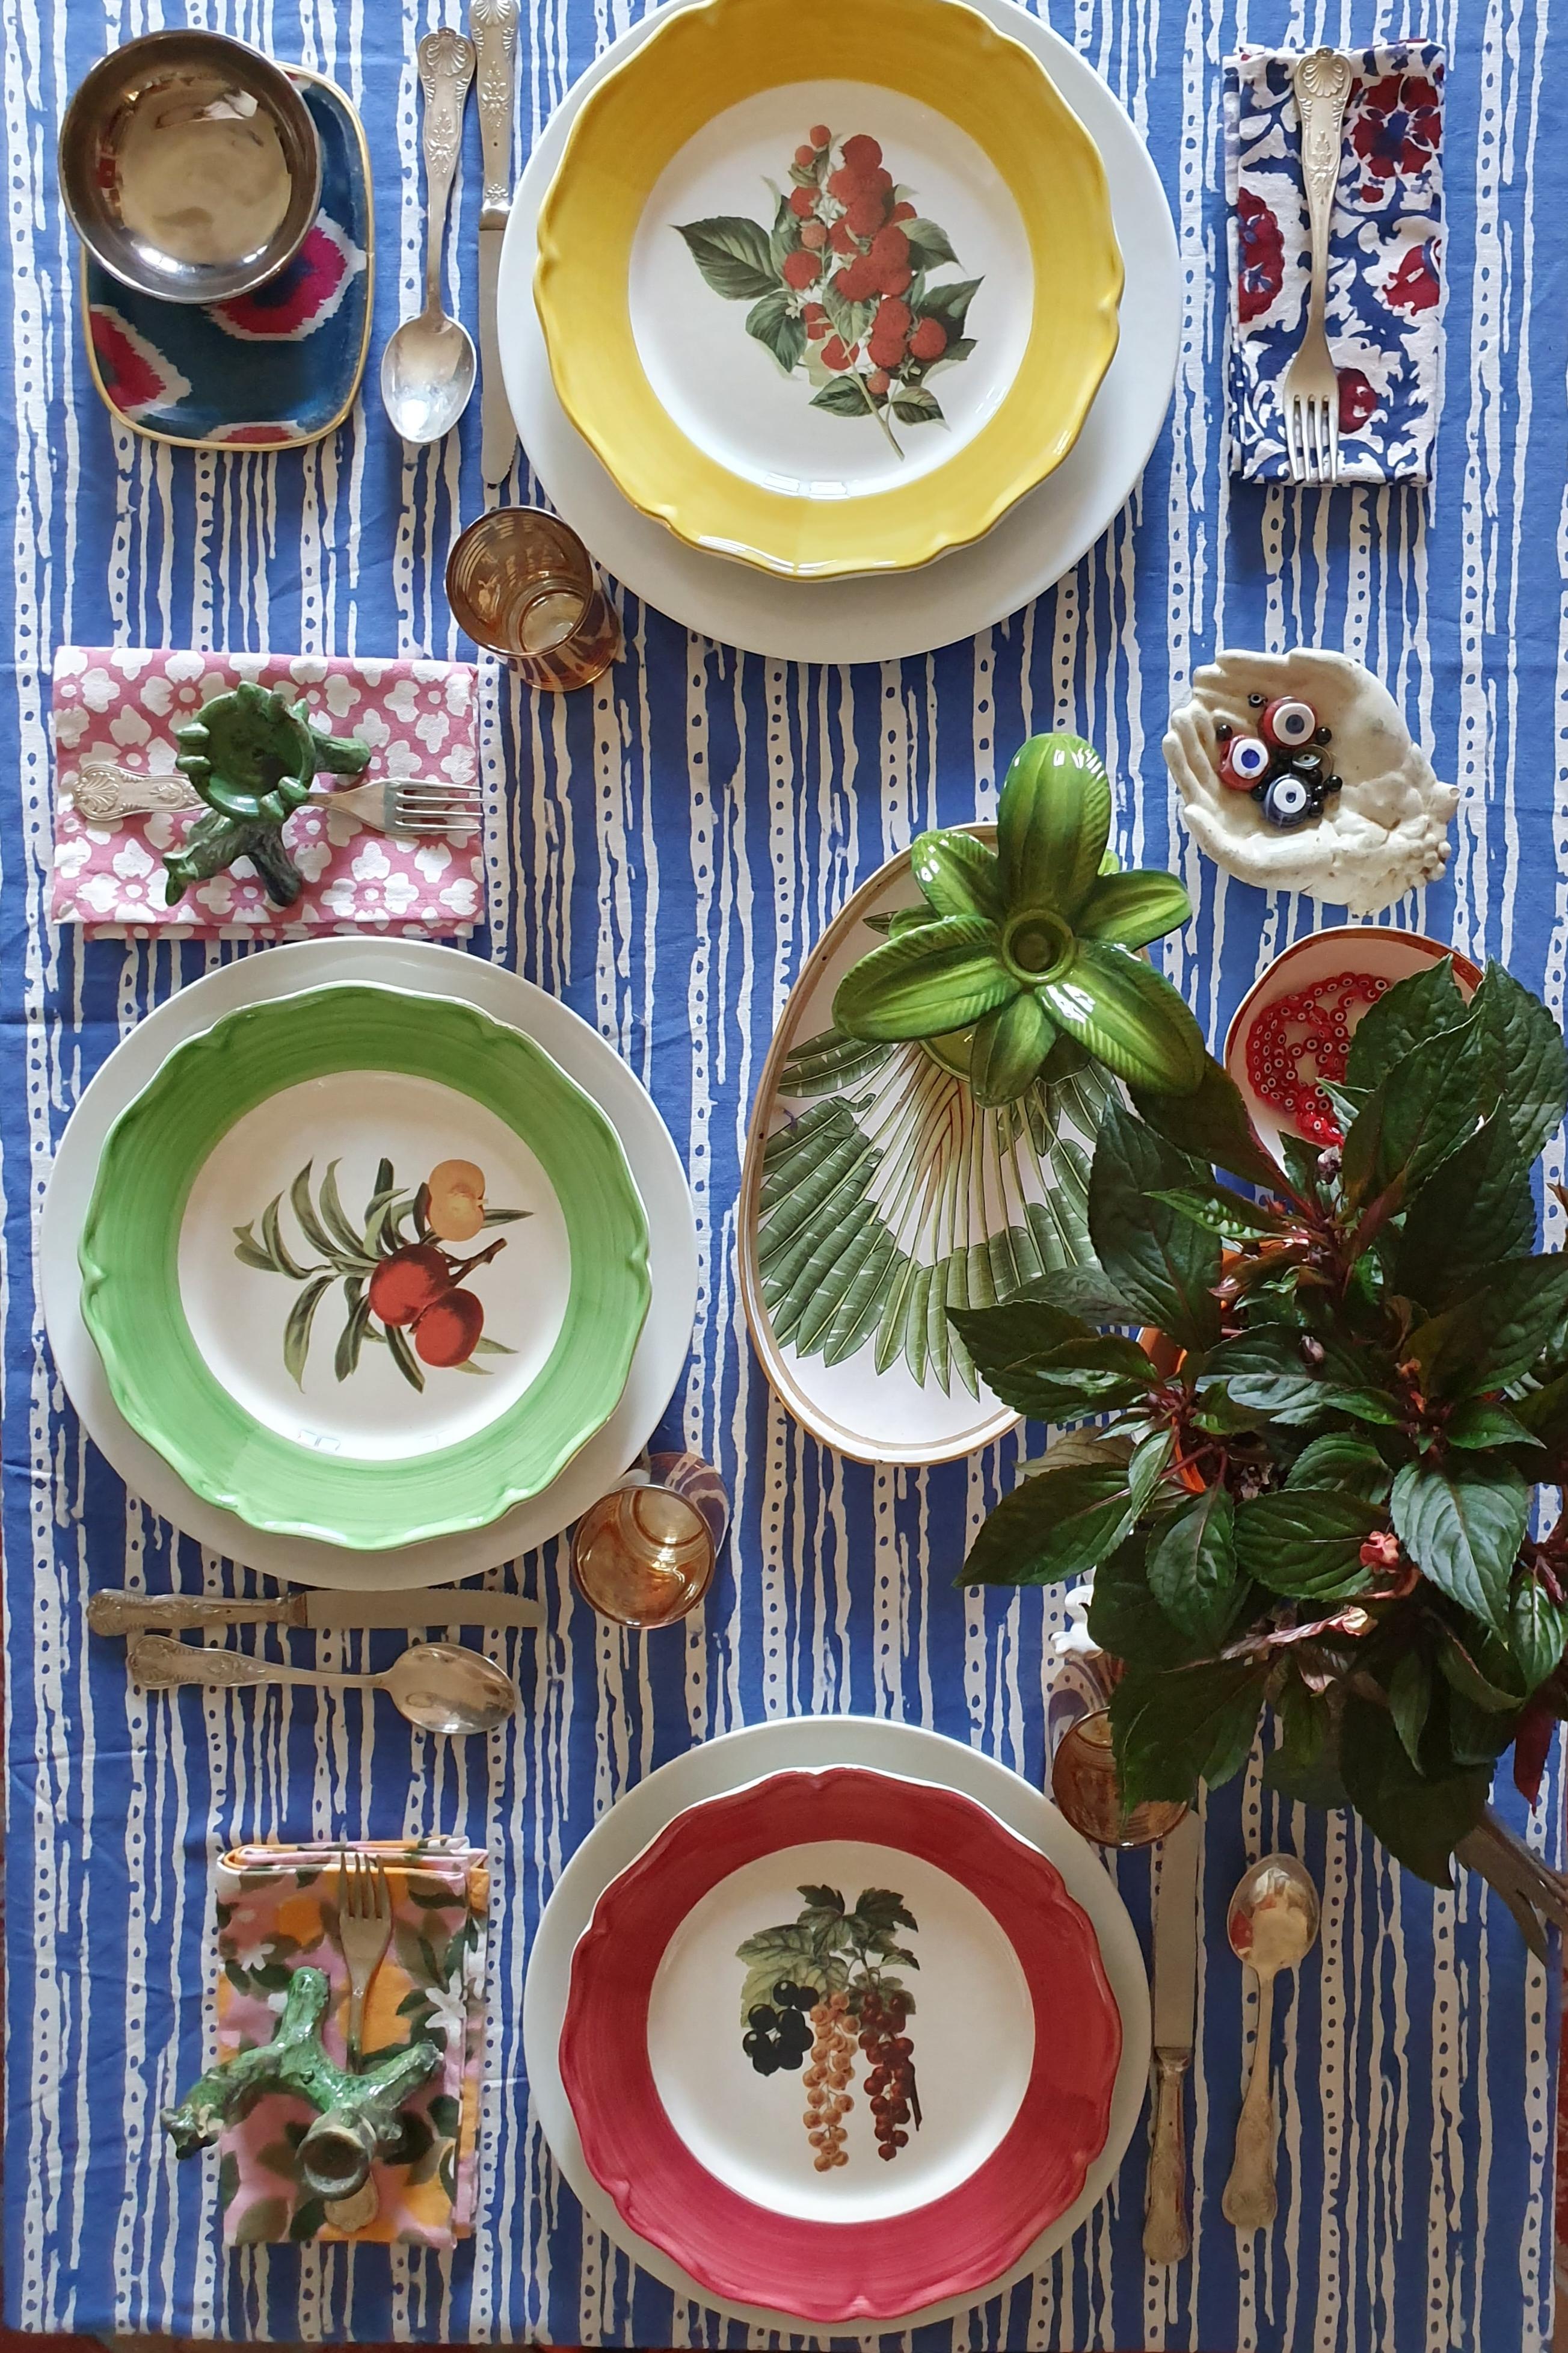 These stunning plates are made in Italy by local artisans
The border is hand painted while the fissure at the center is a printed image

Food safe and dishwasher safe

Measures: 27cm dinner plates.